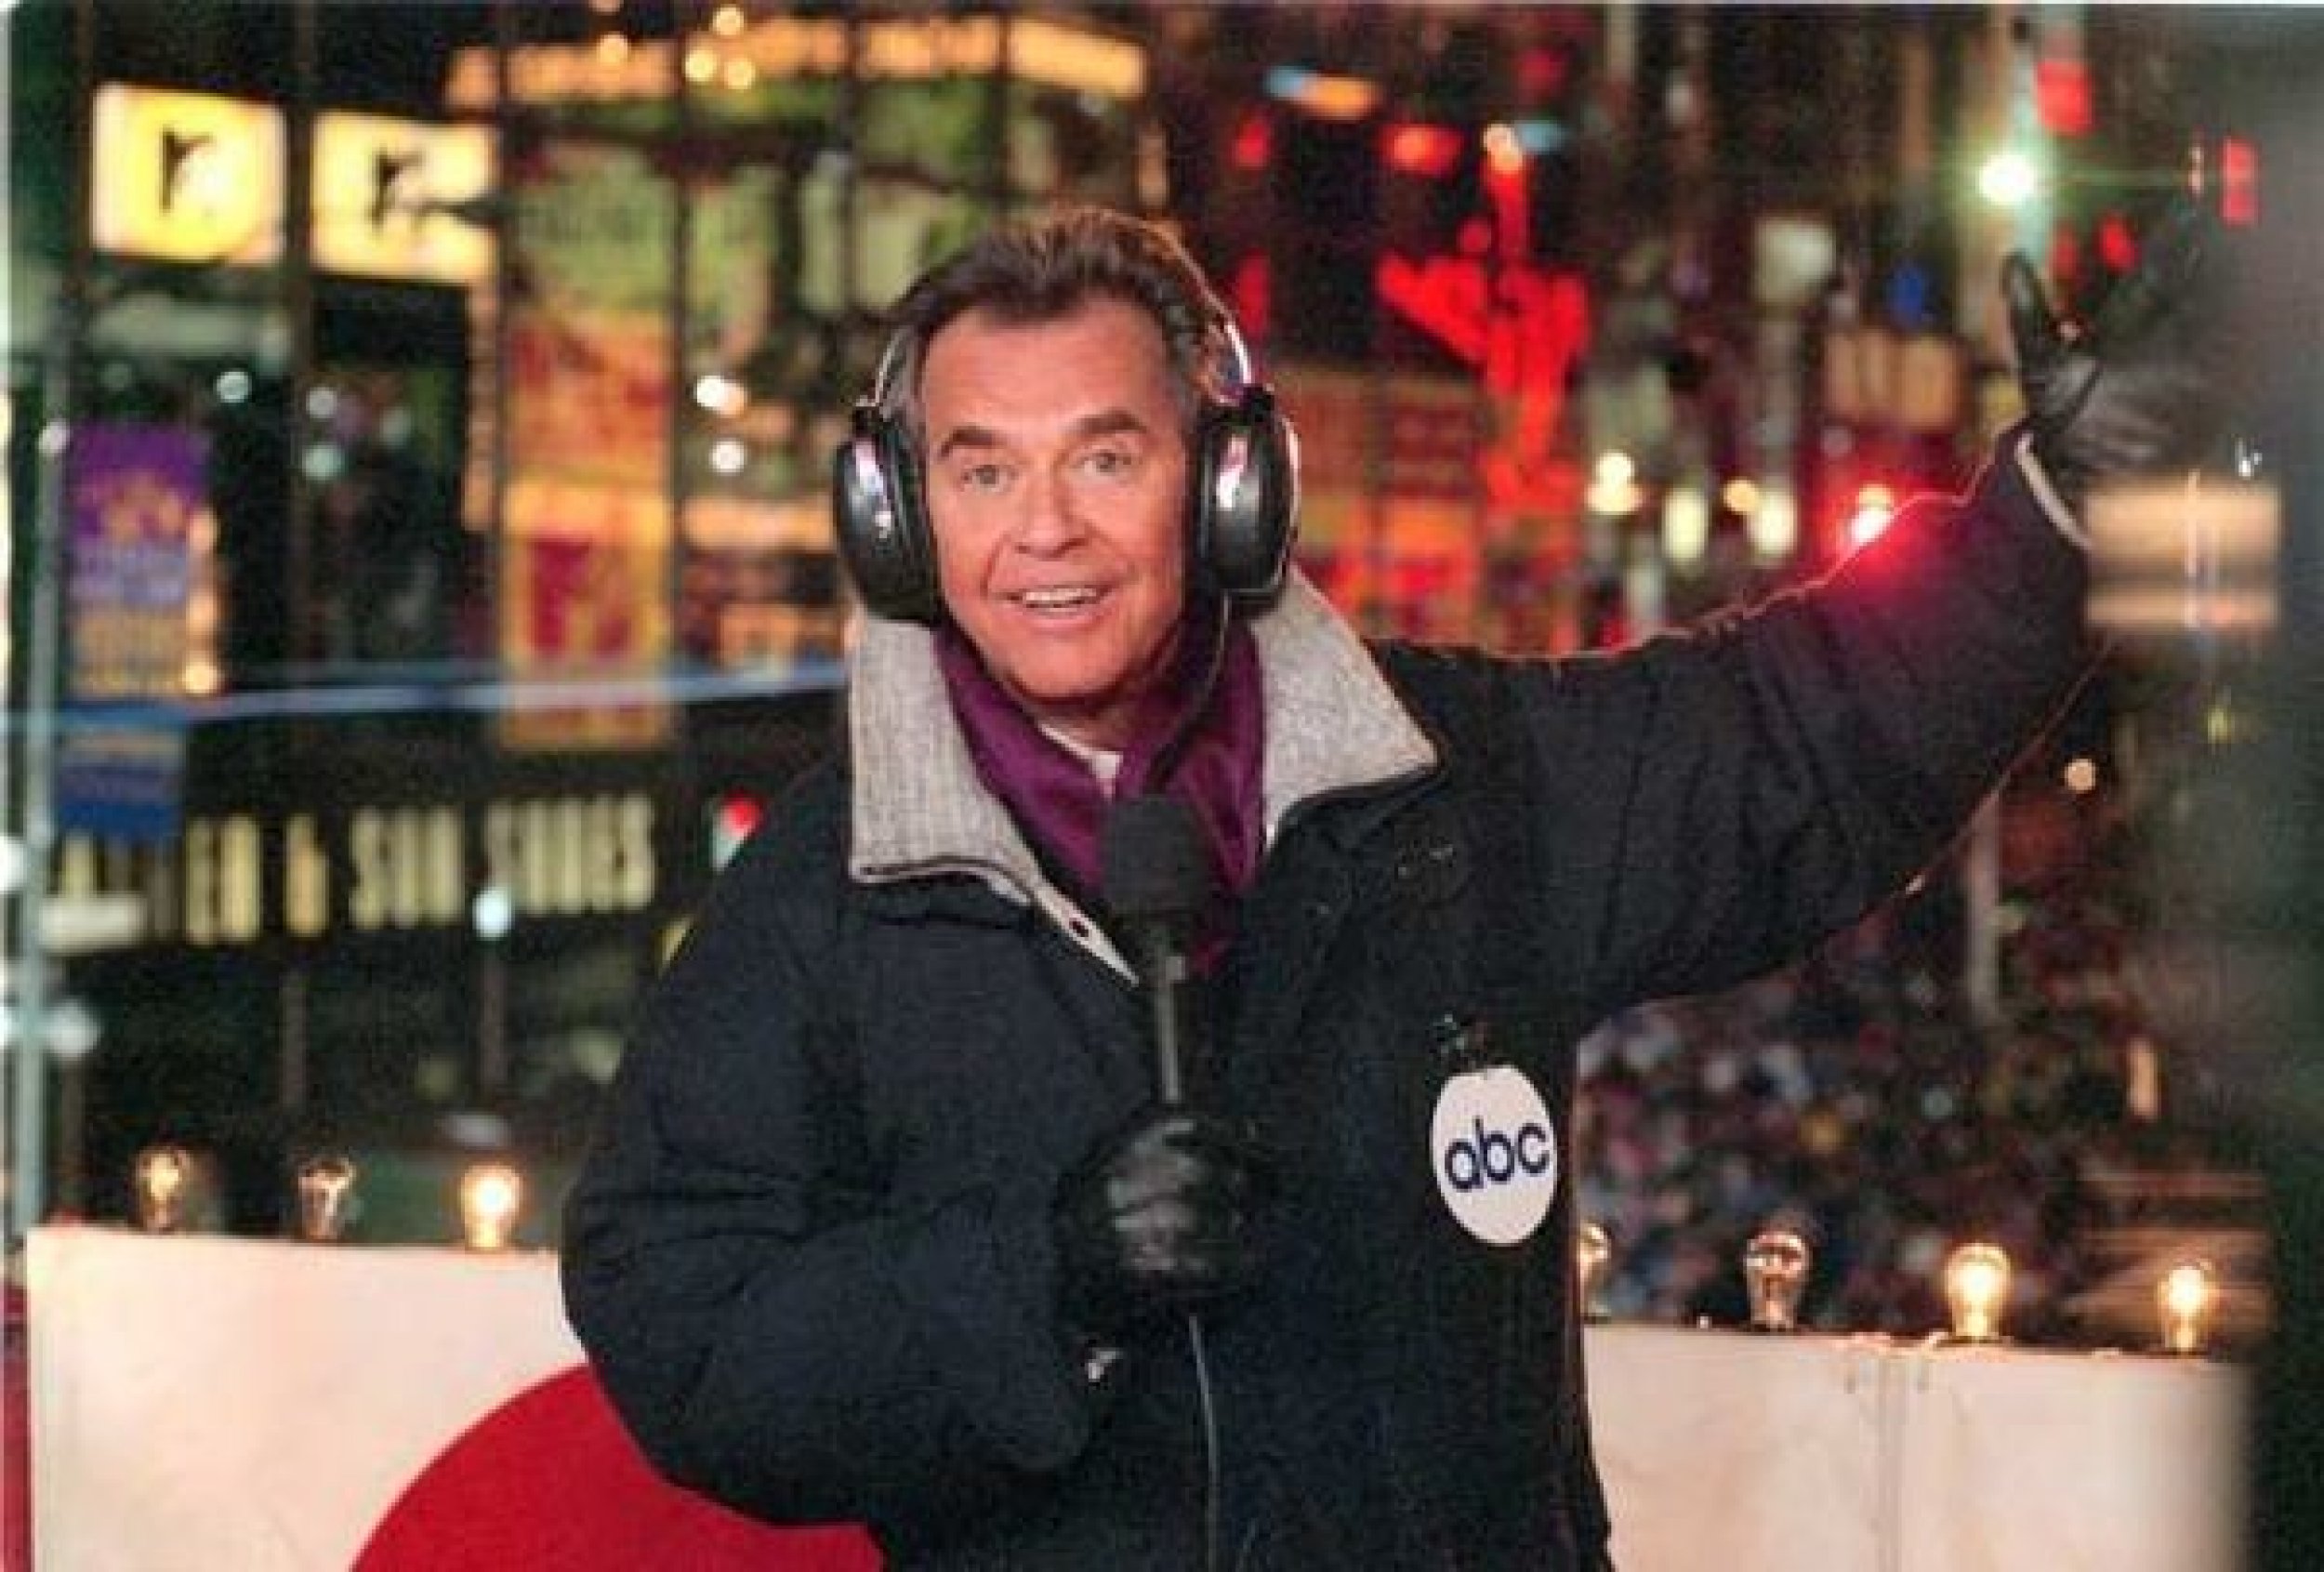 Dick Clark Outside During His quotNew Years Rockin Evequot